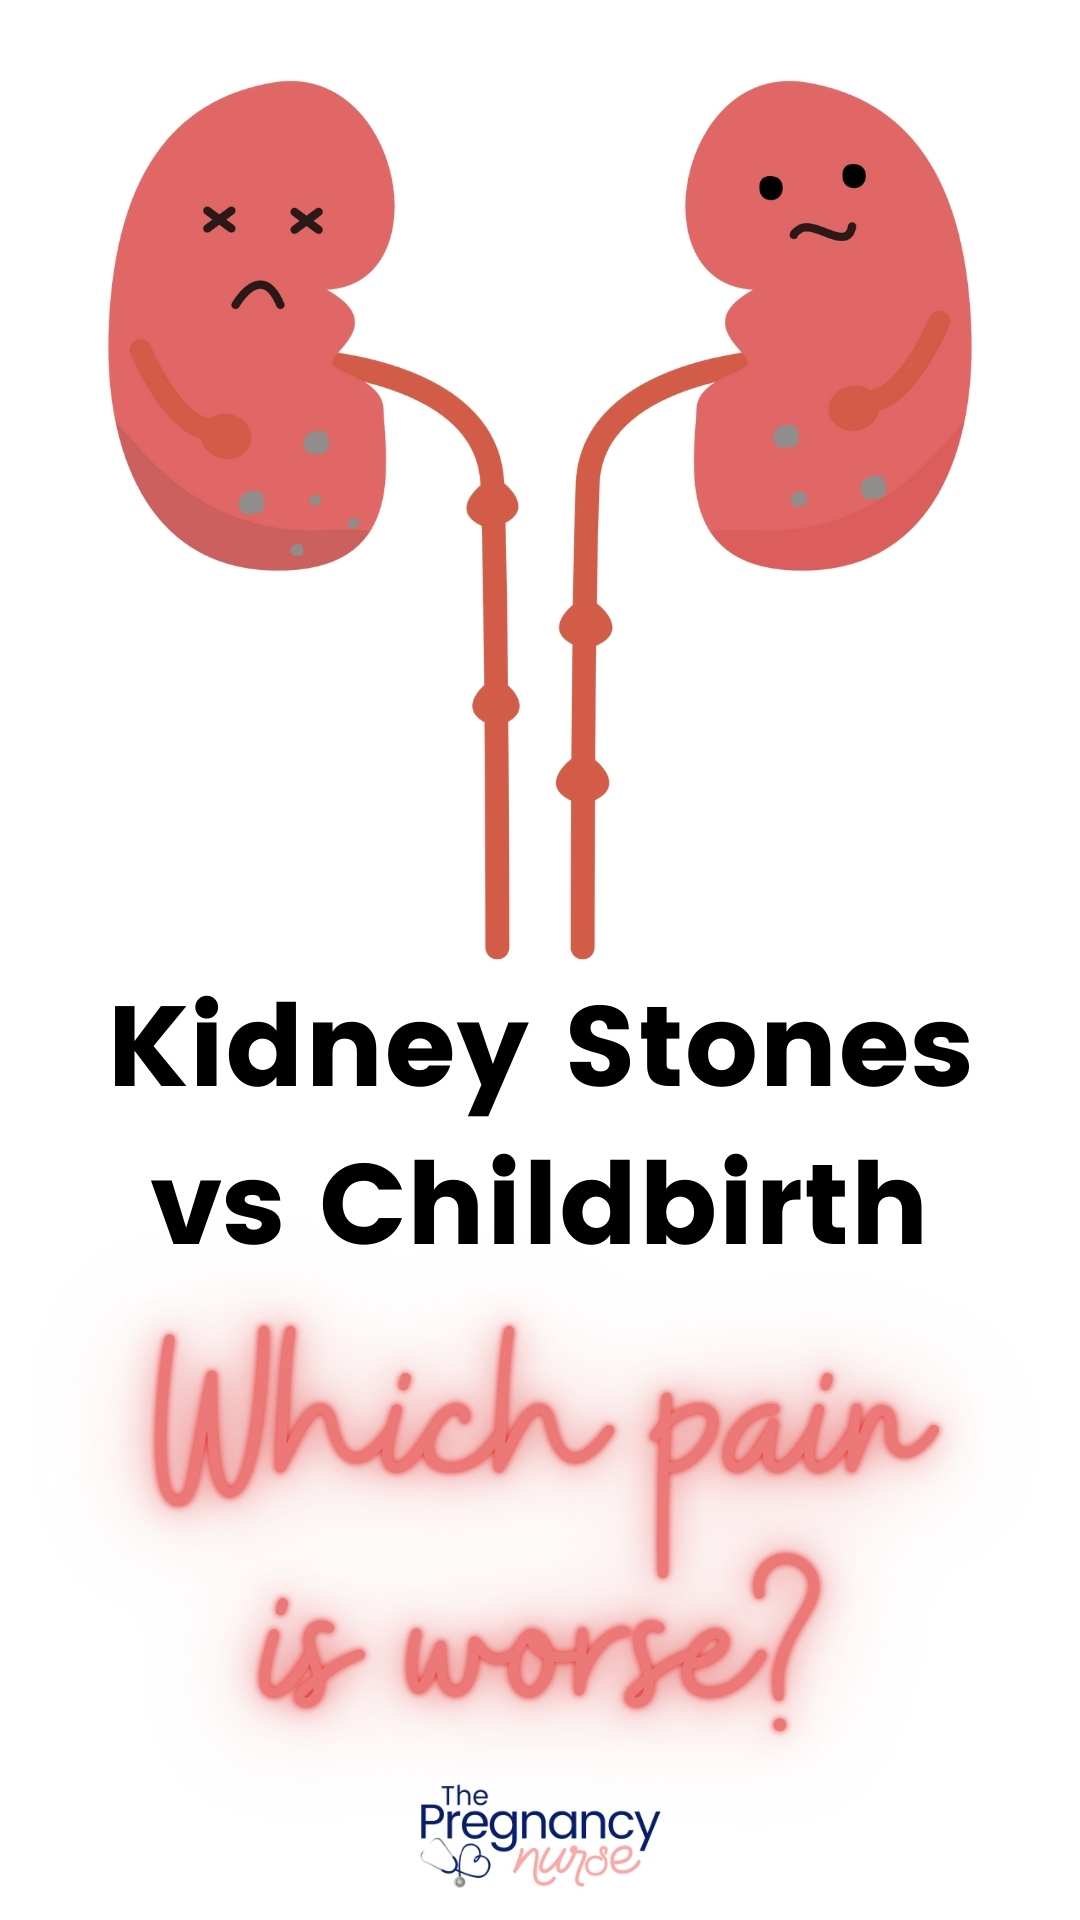 When it comes to pain, childbirth and kidney stones have something in common - they both cause intense discomfort that can feel unbearable. But which one is worse? We'll investigate the pain of kidney stones versus childbirth to find out which is the most painful. Join us as we dive deep into the world of pain to decipher which experience is the most unbearable.